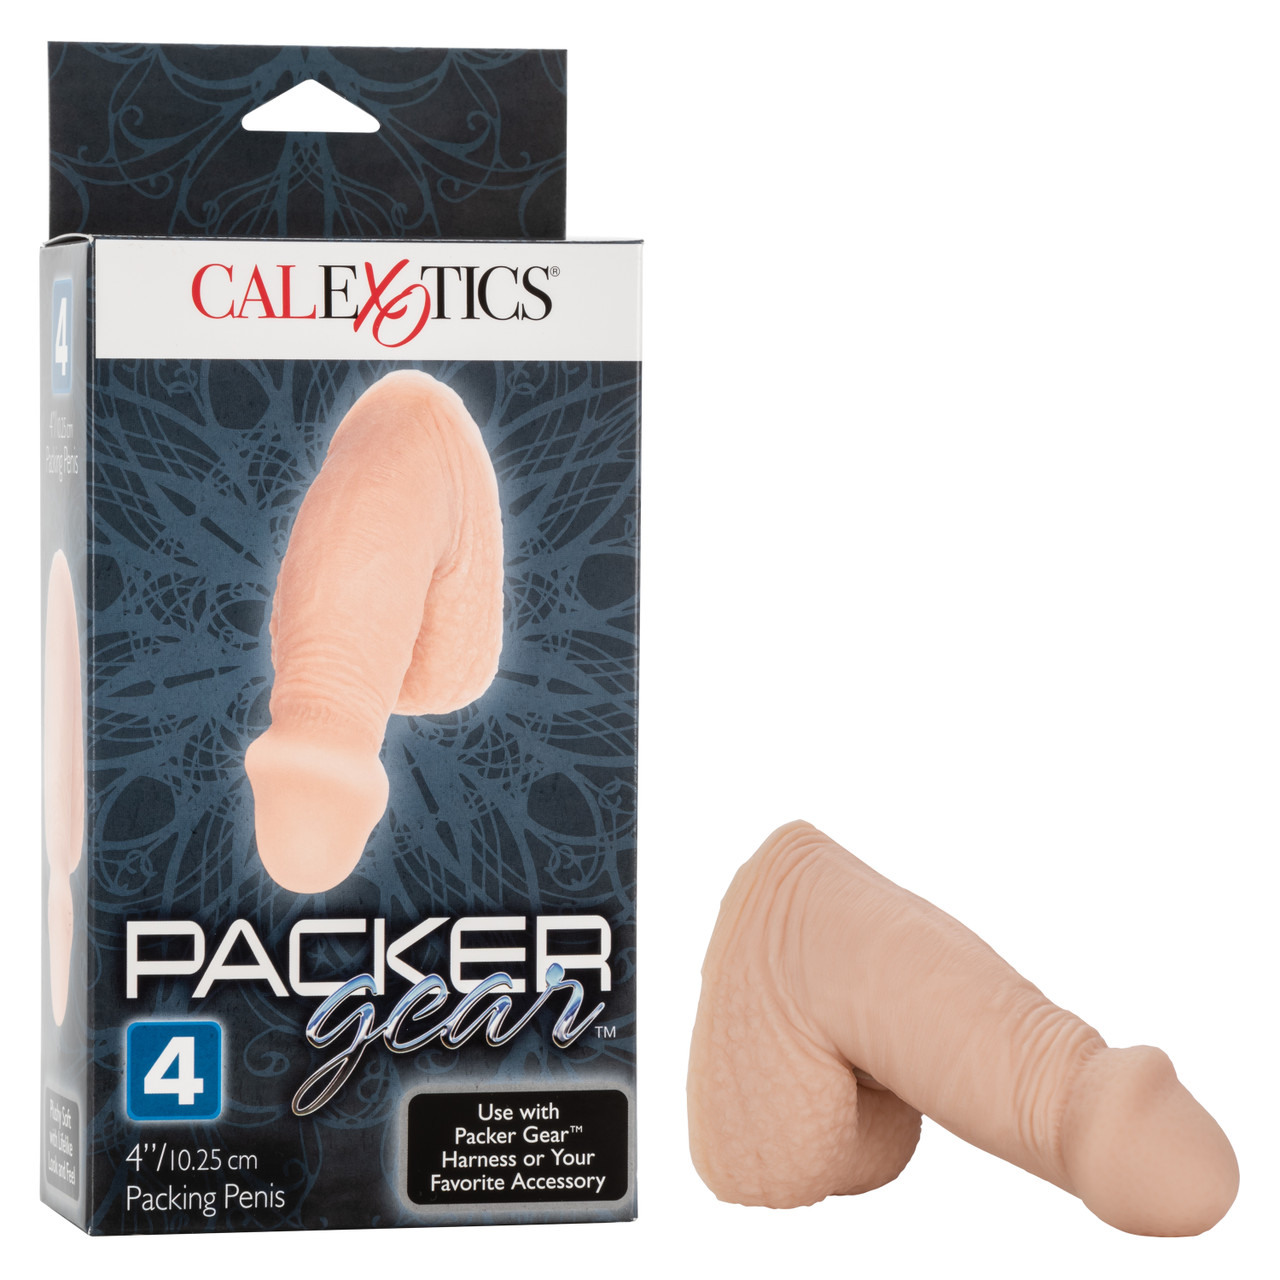 PACKER GEAR IVORY PACKING PENIS 4IN - Click Image to Close